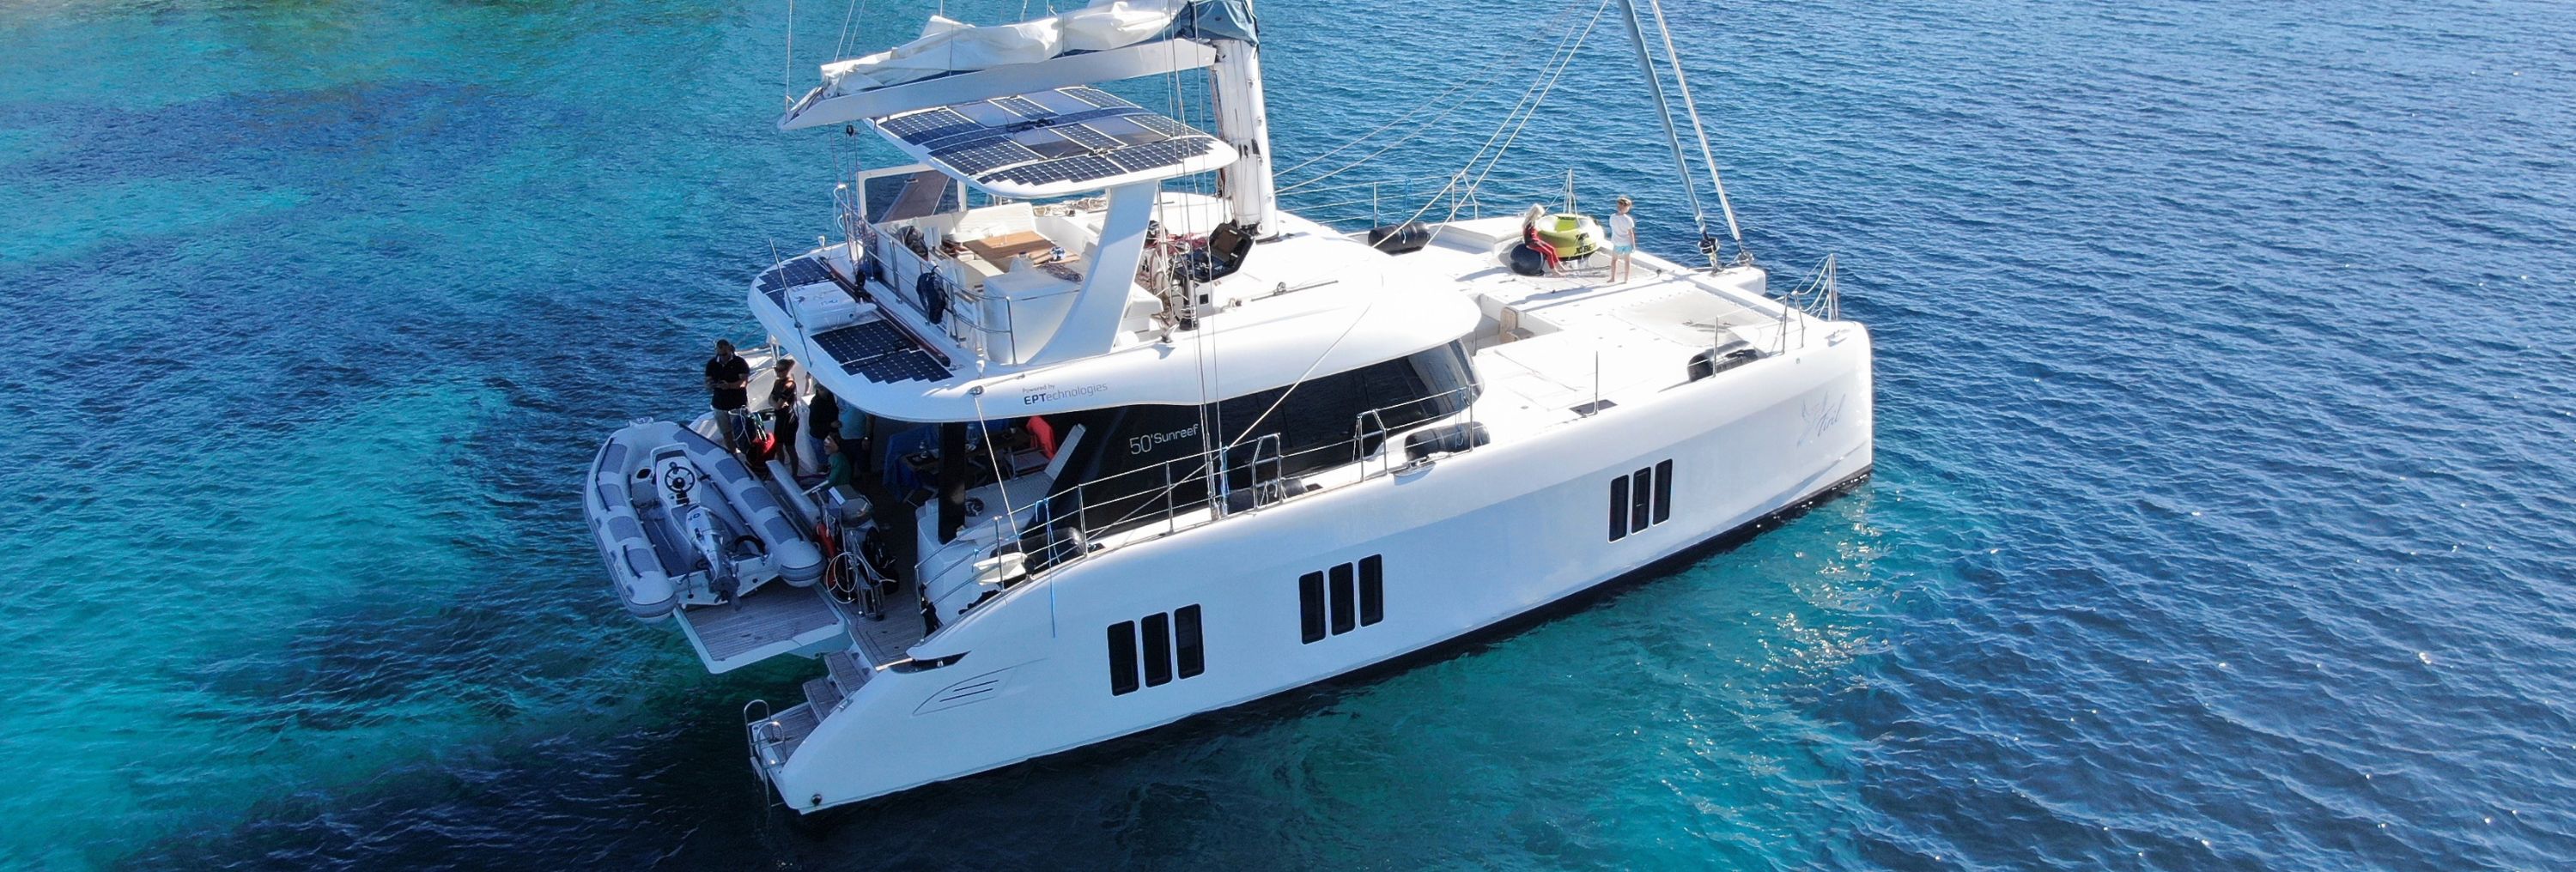 TIRIL: Special Offer for the launch of TIRIL in French Polynesia